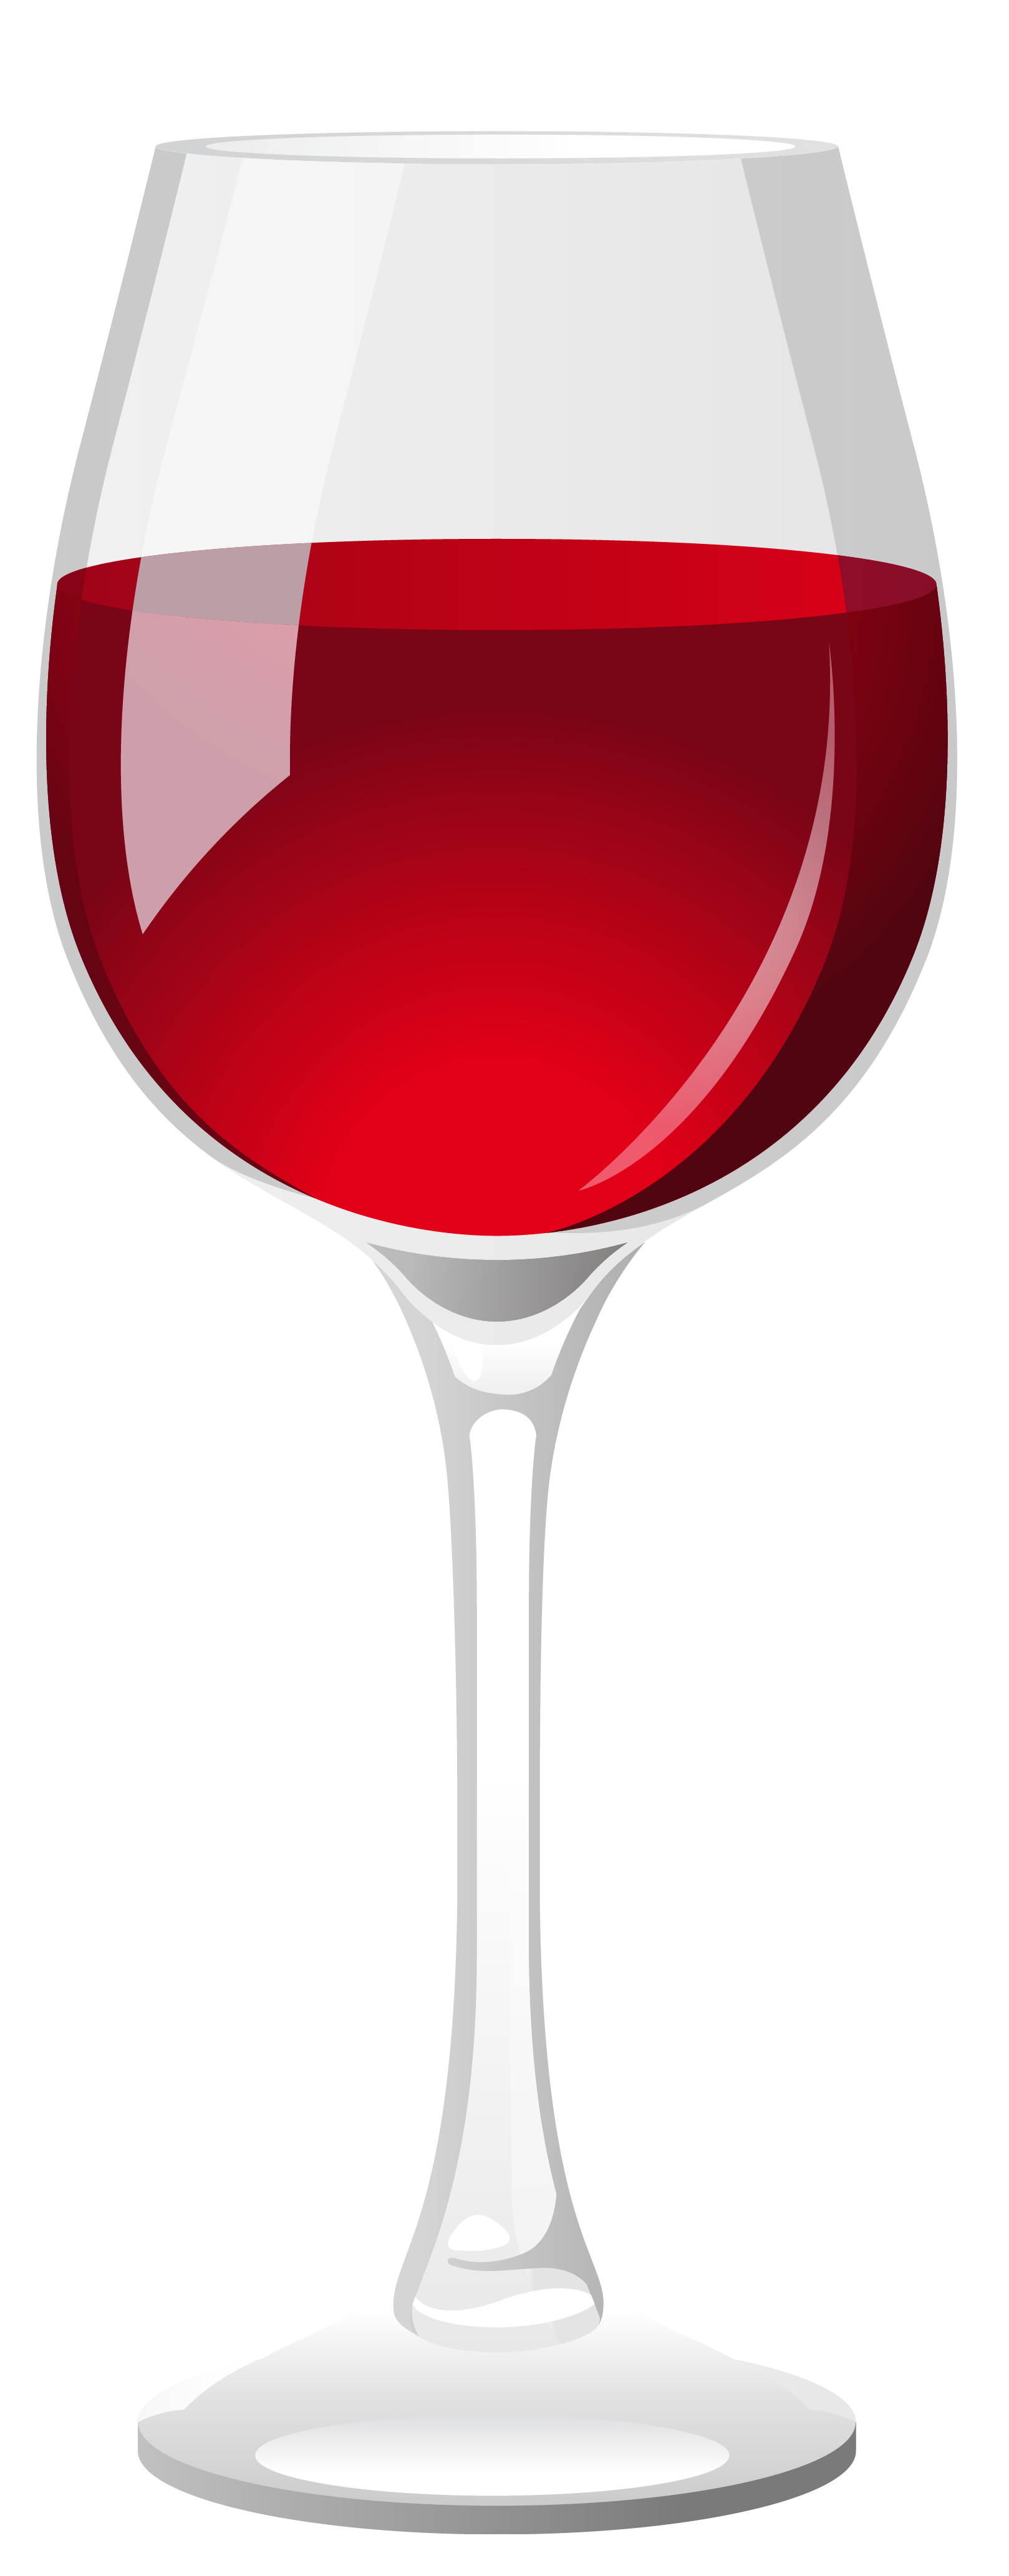 Free Glass Of Red Wine Png, Download Free Clip Art, Free